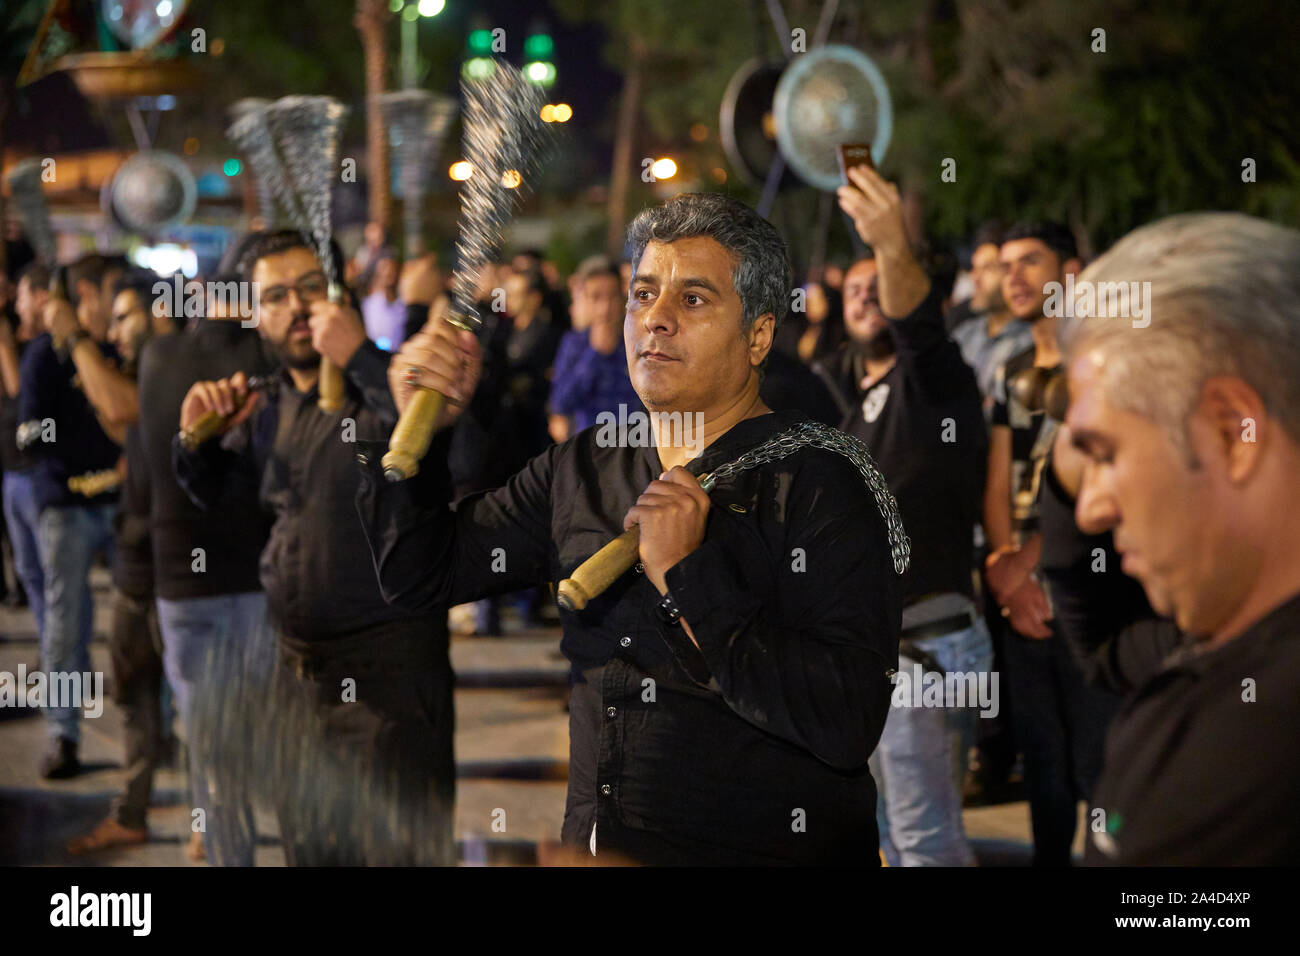 For the annual holiday Arbain many believers gathered in the city of Qom in Iran on 09.11.2017. The religious festival is celebrated 40 days after Ashura, the feast of the martyrdom of Hussein, a grandson of the Prophet Muhammad. The procession takes place throughout the day until late in the evening and then ends at the shrine of Fatemeh al-Masumeh, sister of the Eighth Imam. | usage worldwide Stock Photo